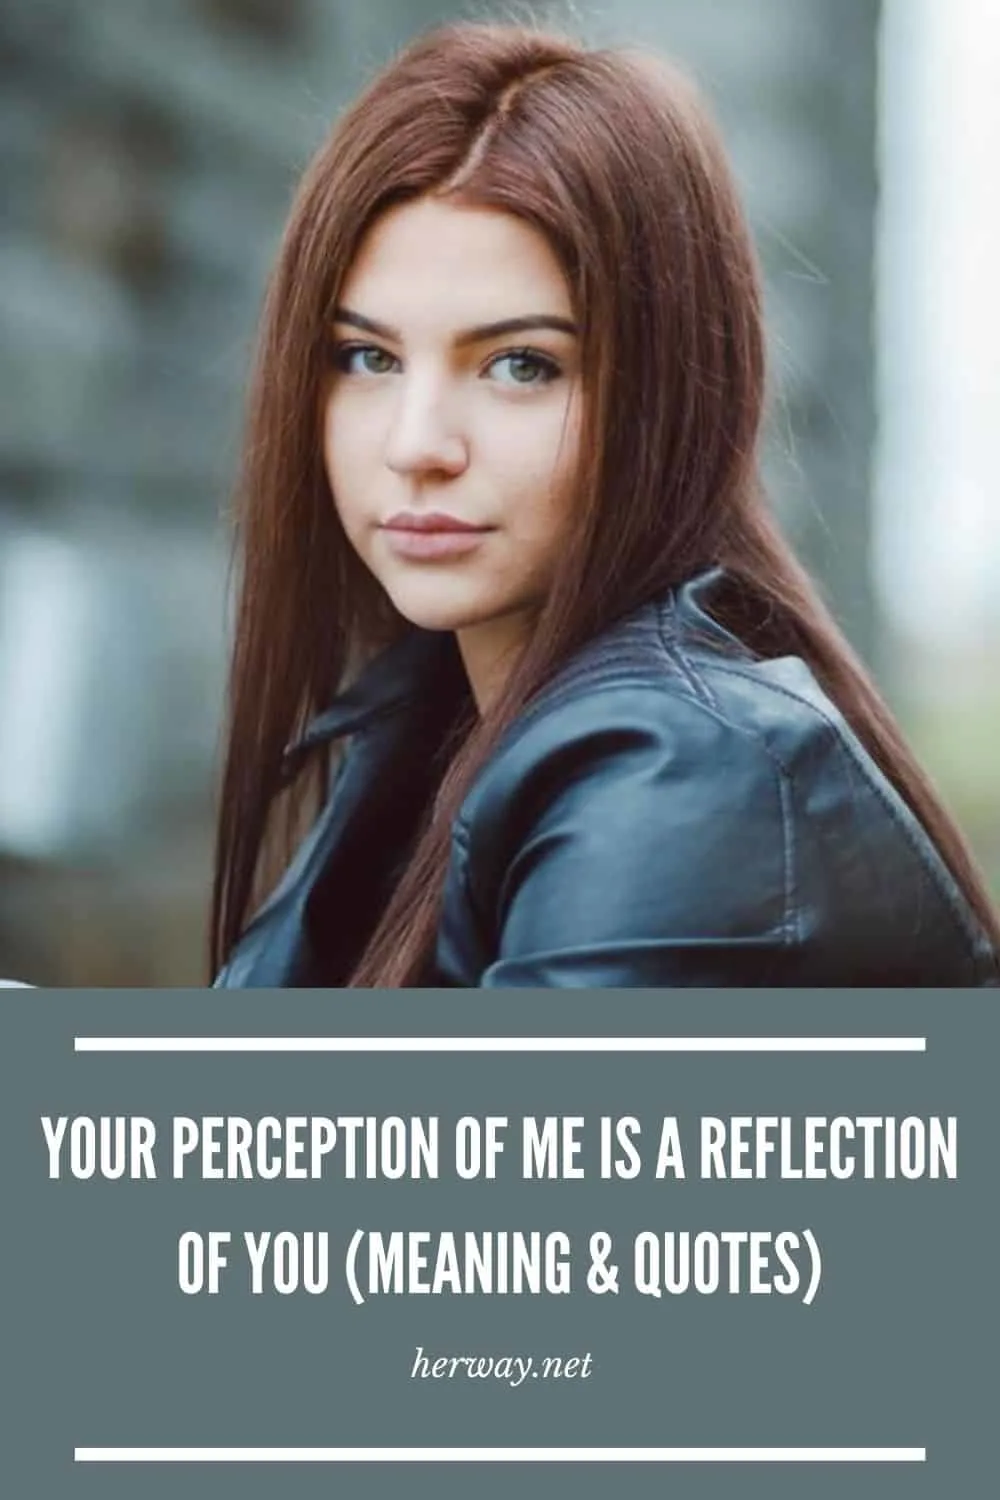 Your Perception Of Me Is A Reflection Of You (Meaning & Quotes)